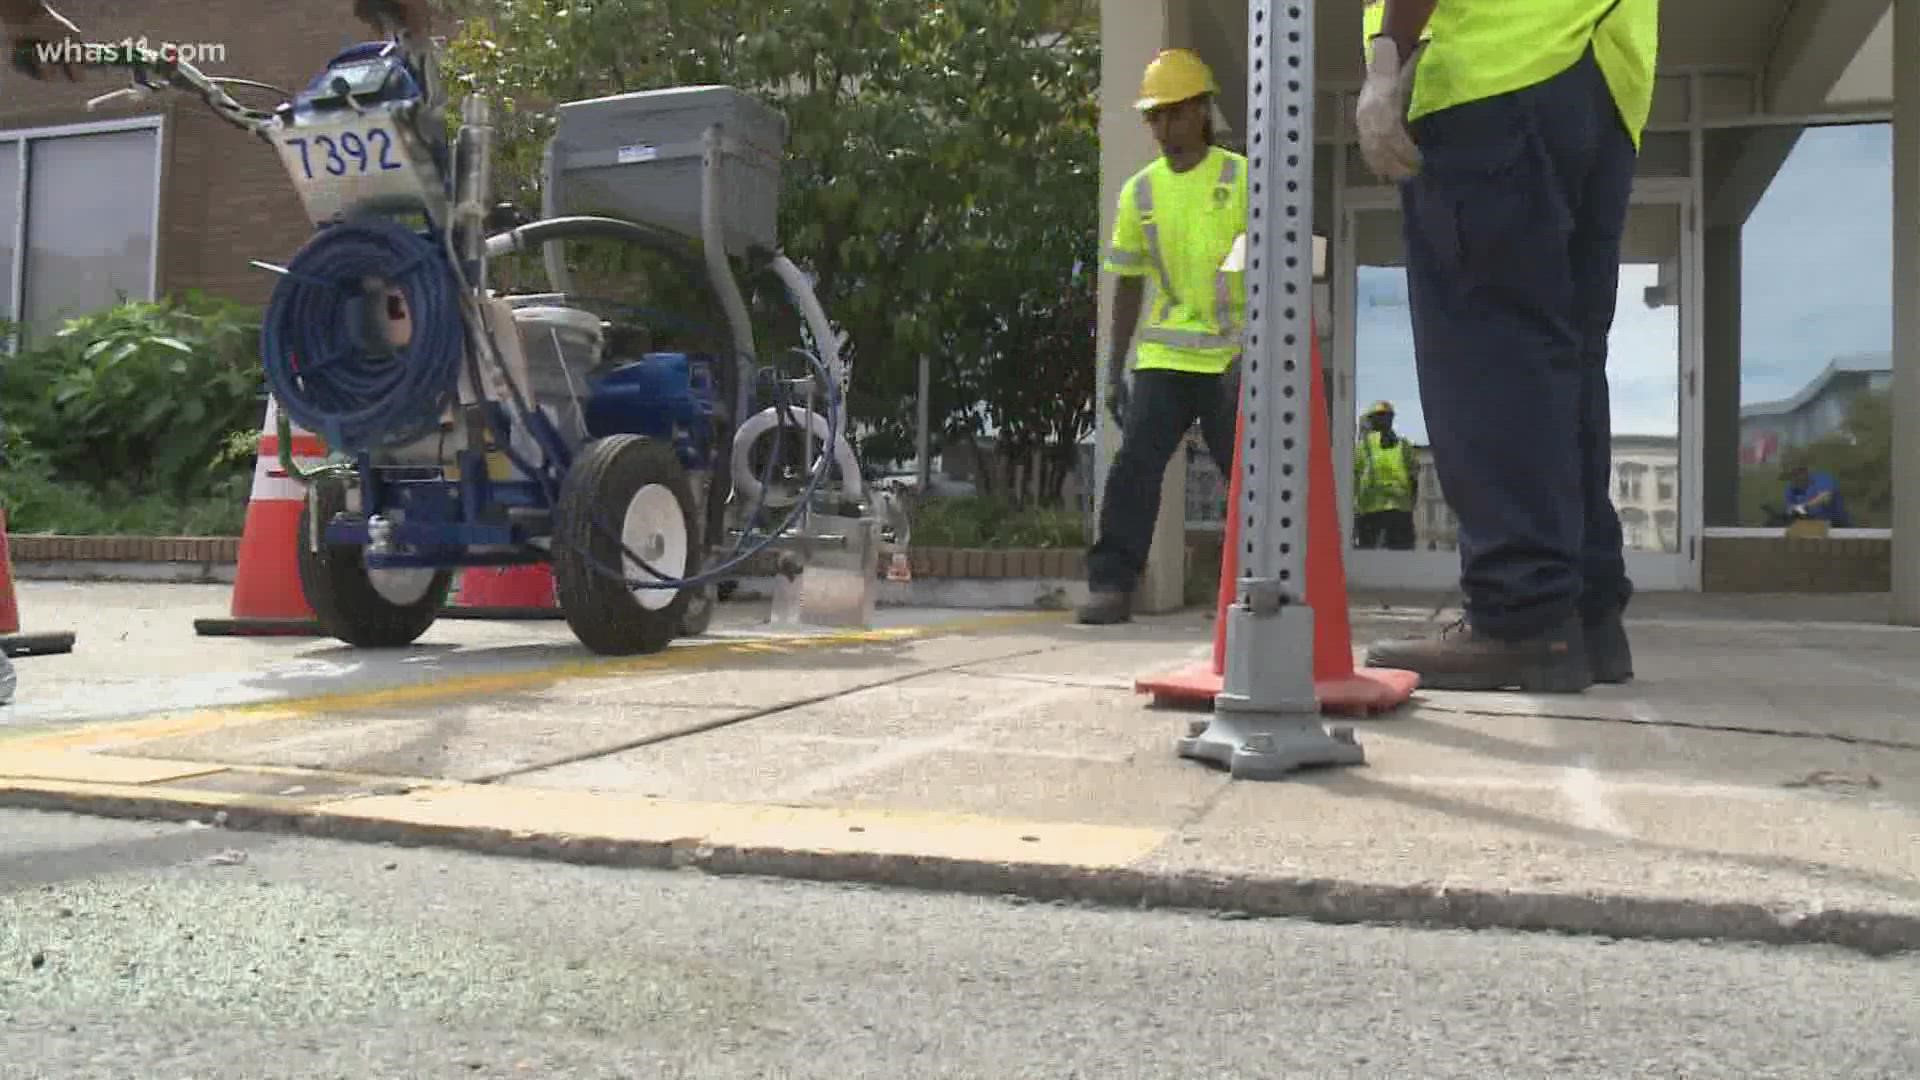 Metro Public Works said the original lines were painted over to adjust the dimensions of the buffer zone.